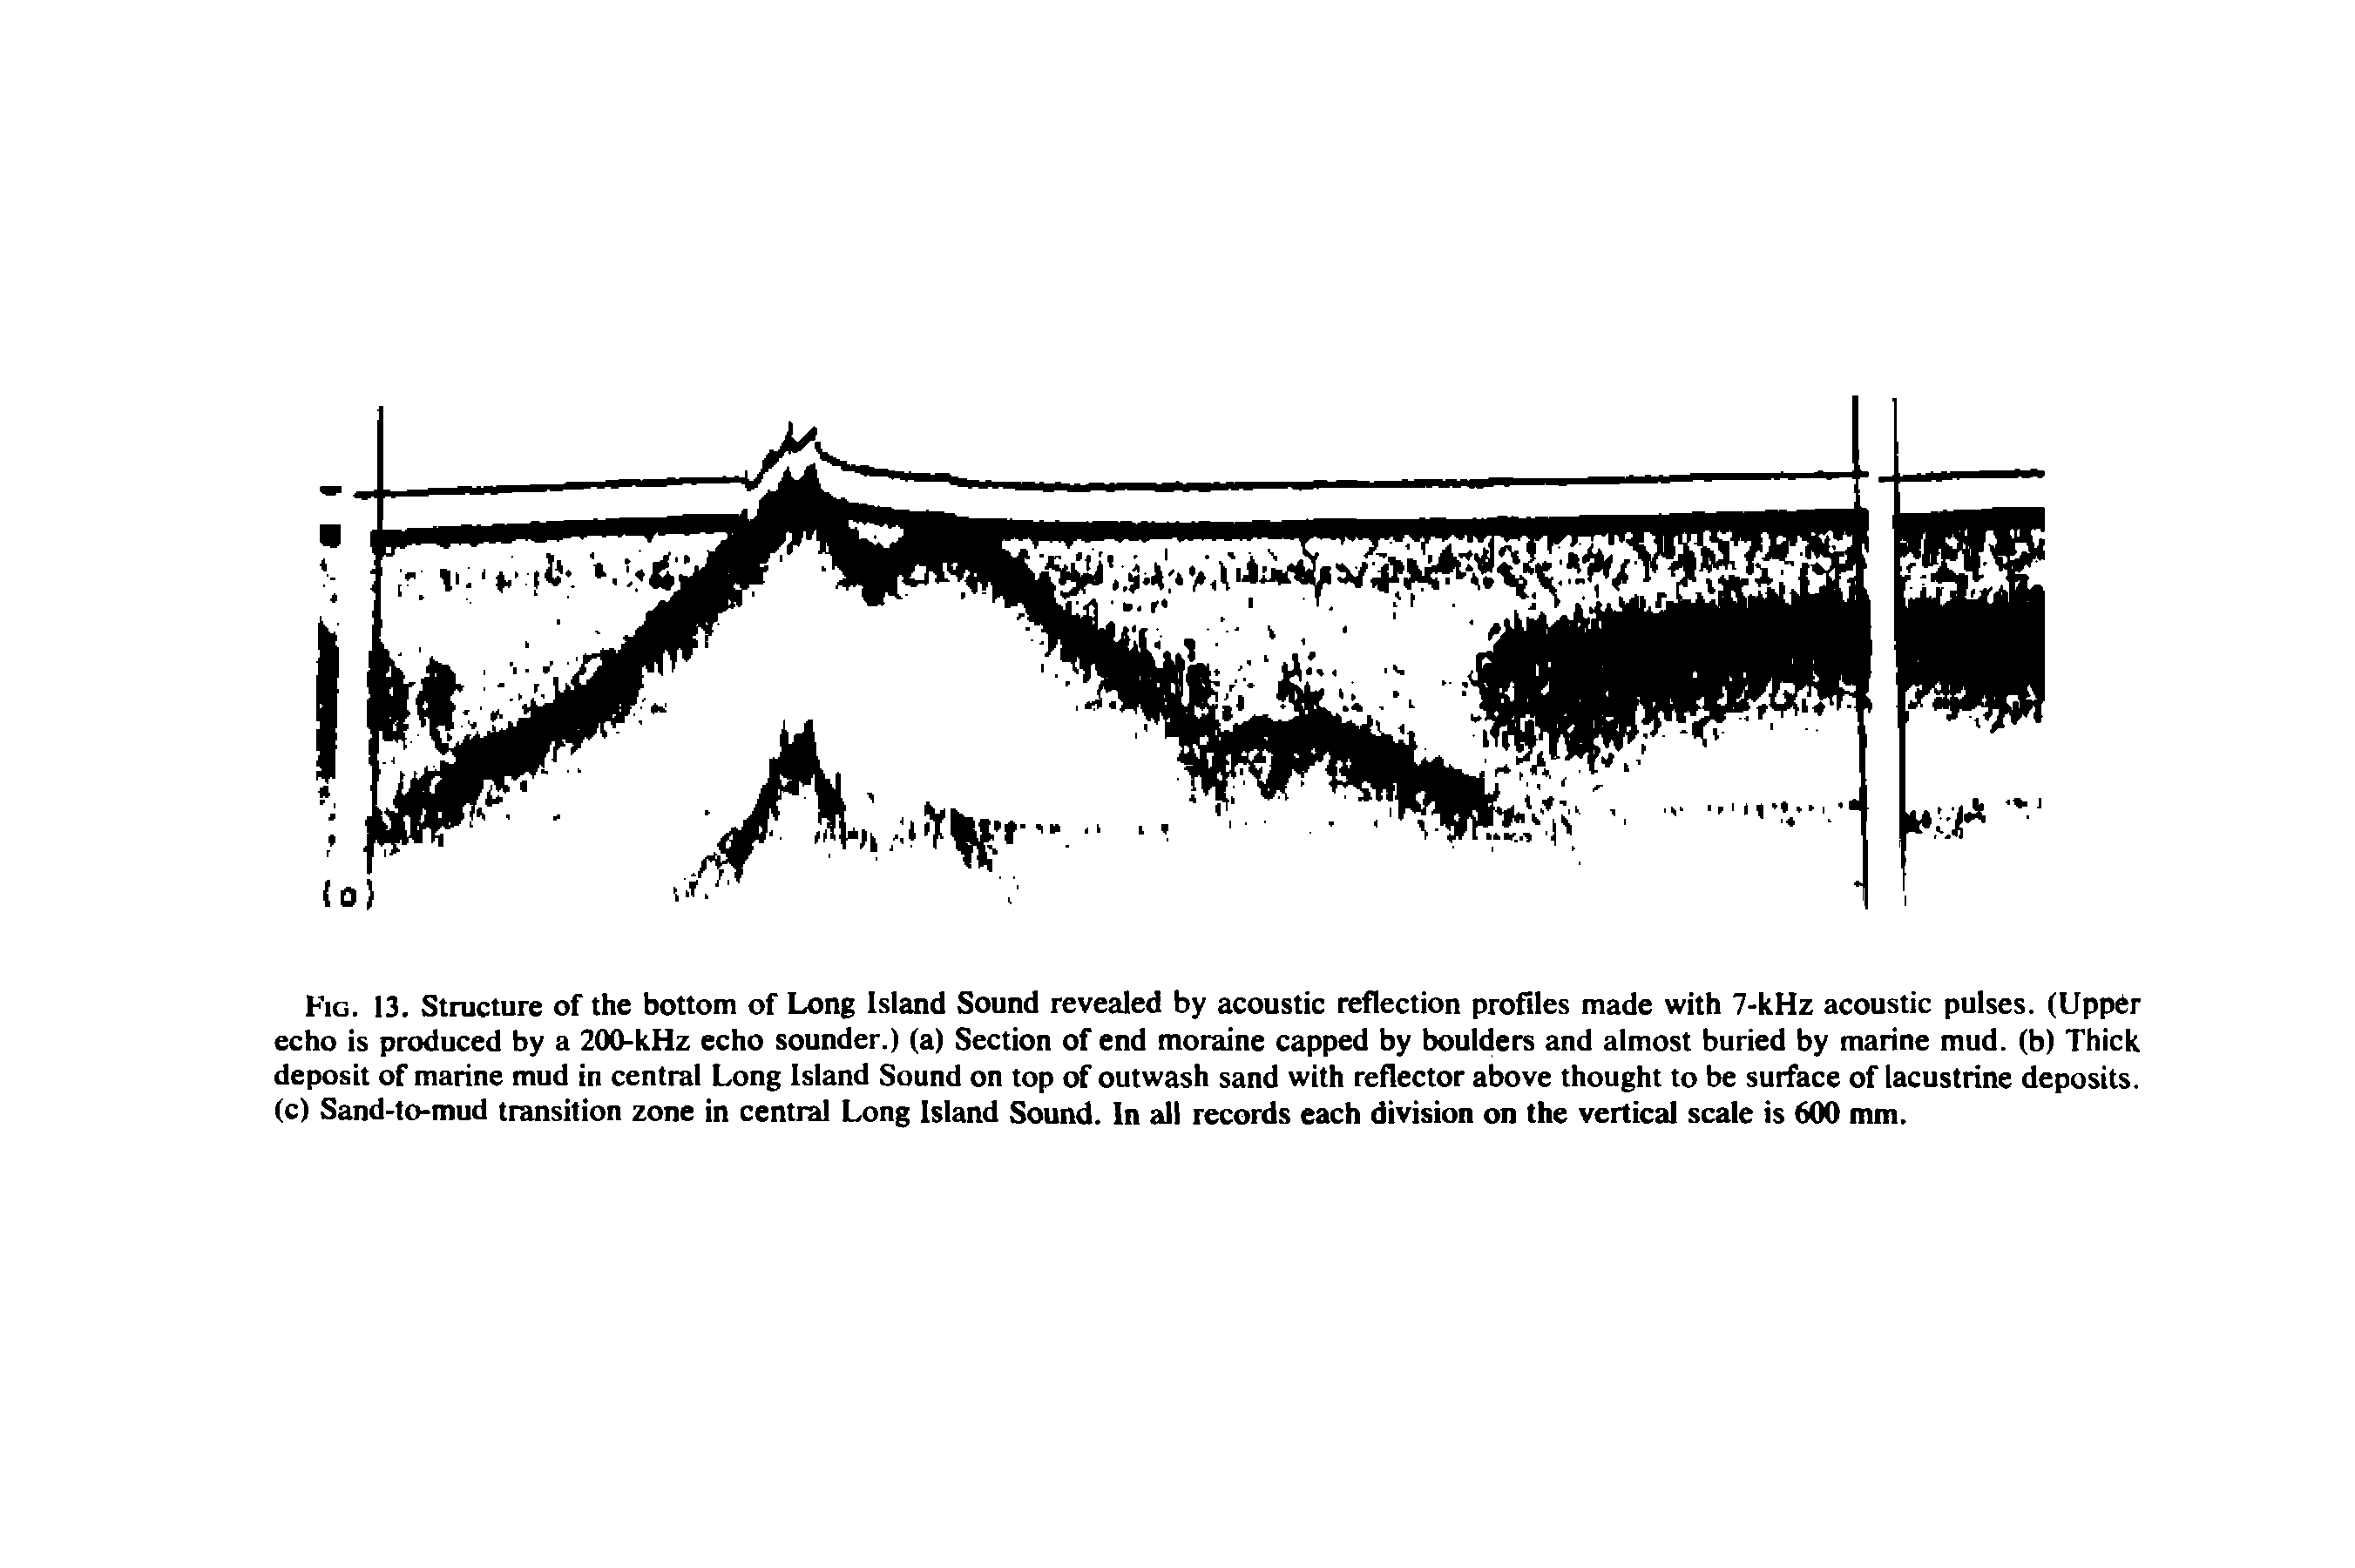 Fig. 13. Structure of the bottom of Long Island Sound revealed by acoustic reflection profiles made with 7-kHz acoustic pulses. (Upper echo is produced by a 2(X)-kHz echo sounder.) (a) Section of end moraine capped by boulders and almost buried by marine mud. (b) Thick deposit of marine mud in central Long Island Sound on top of outwash sand with reflector above thought to be surface of lacustrine deposits, (c) Sand-to-mud transition zone in central Long Island Sound. In all records each division on the vertical scale is 600 mm.